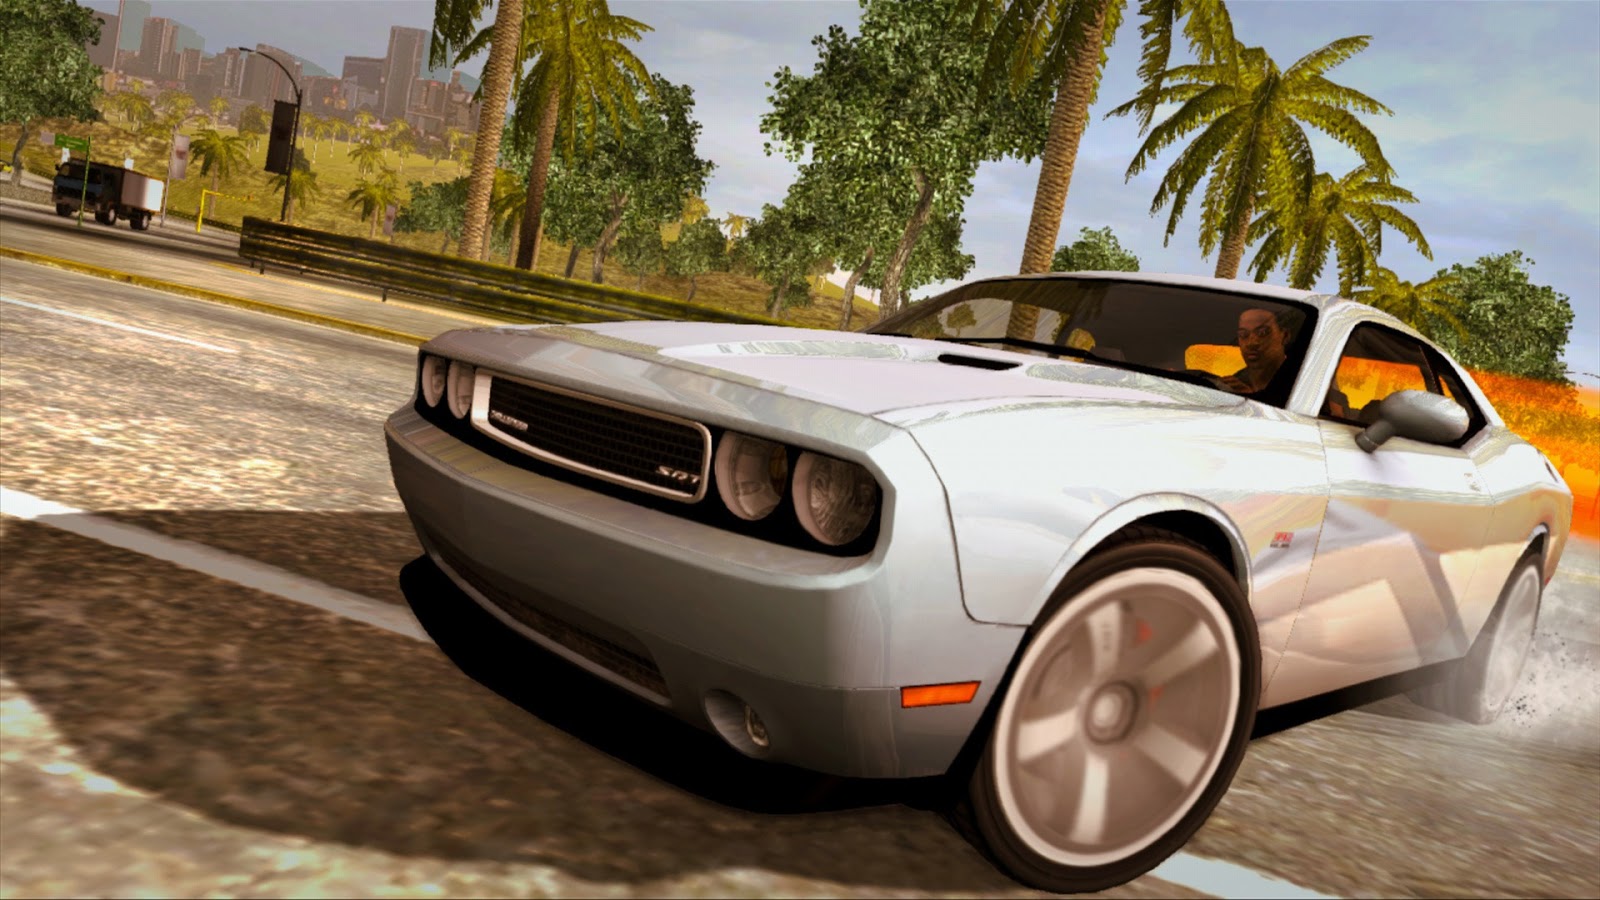 Fast and furious showdown free download pc game full version | free download pc games ...1600 x 900